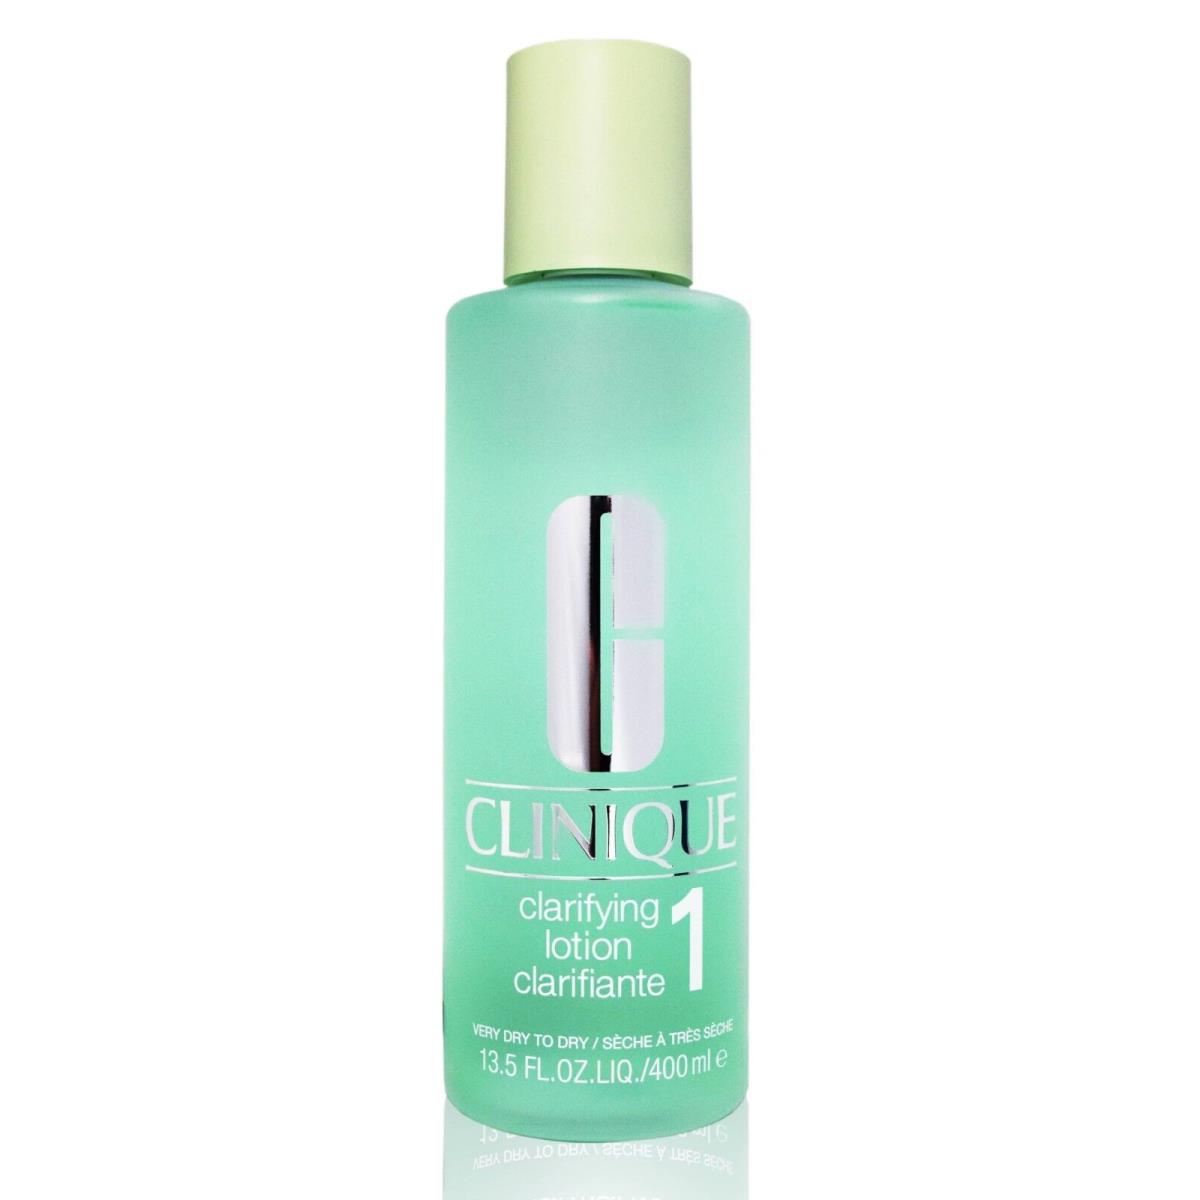 Clinique Clarifying Lotion 1 Very Dry to Dry 13.5oz / 400ml